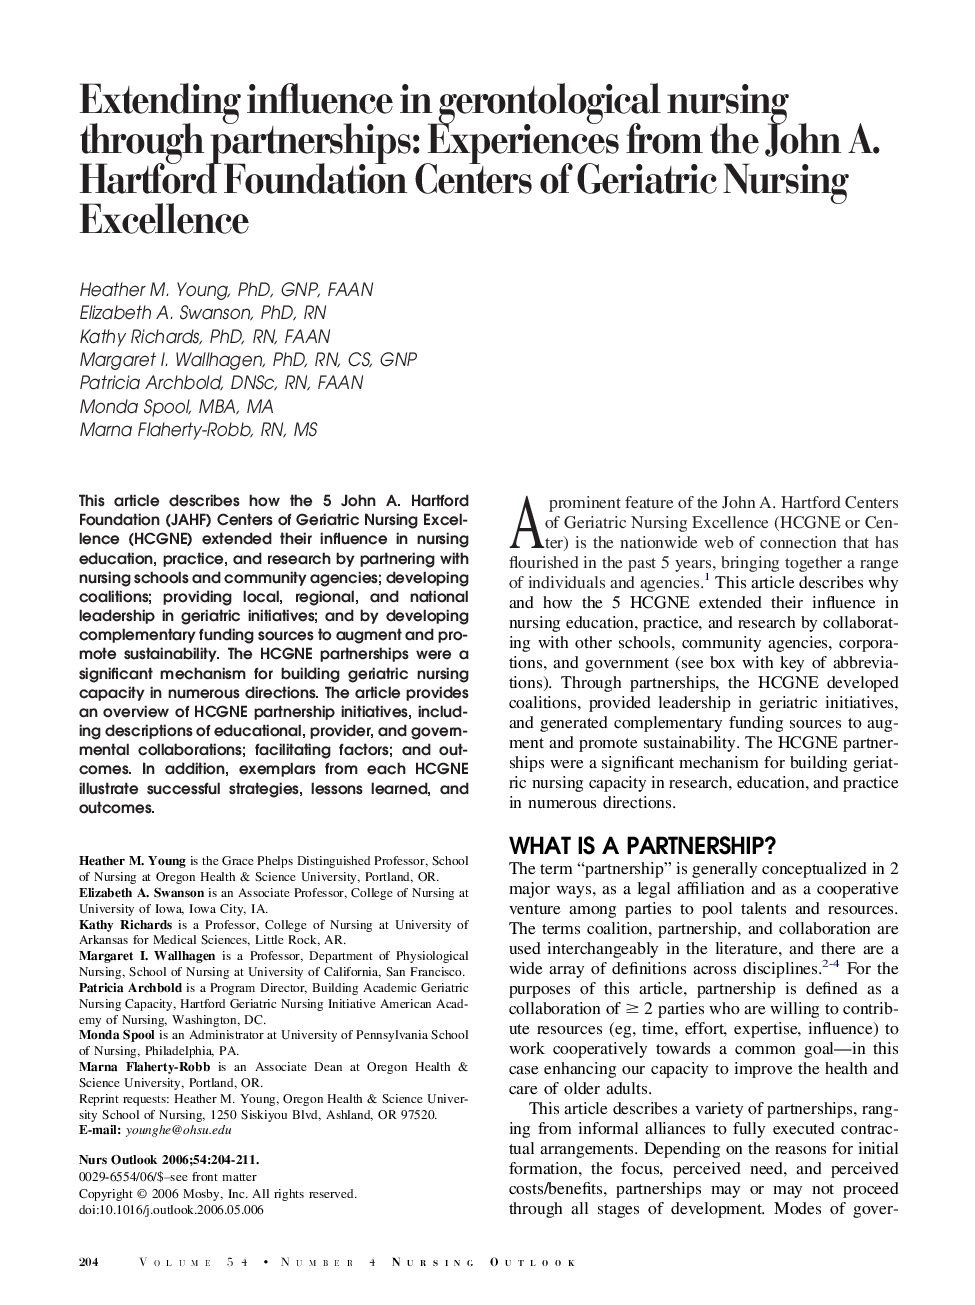 Extending influence in gerontological nursing through partnerships: Experiences from the John A. Hartford Foundation Centers of Geriatric Nursing Excellence